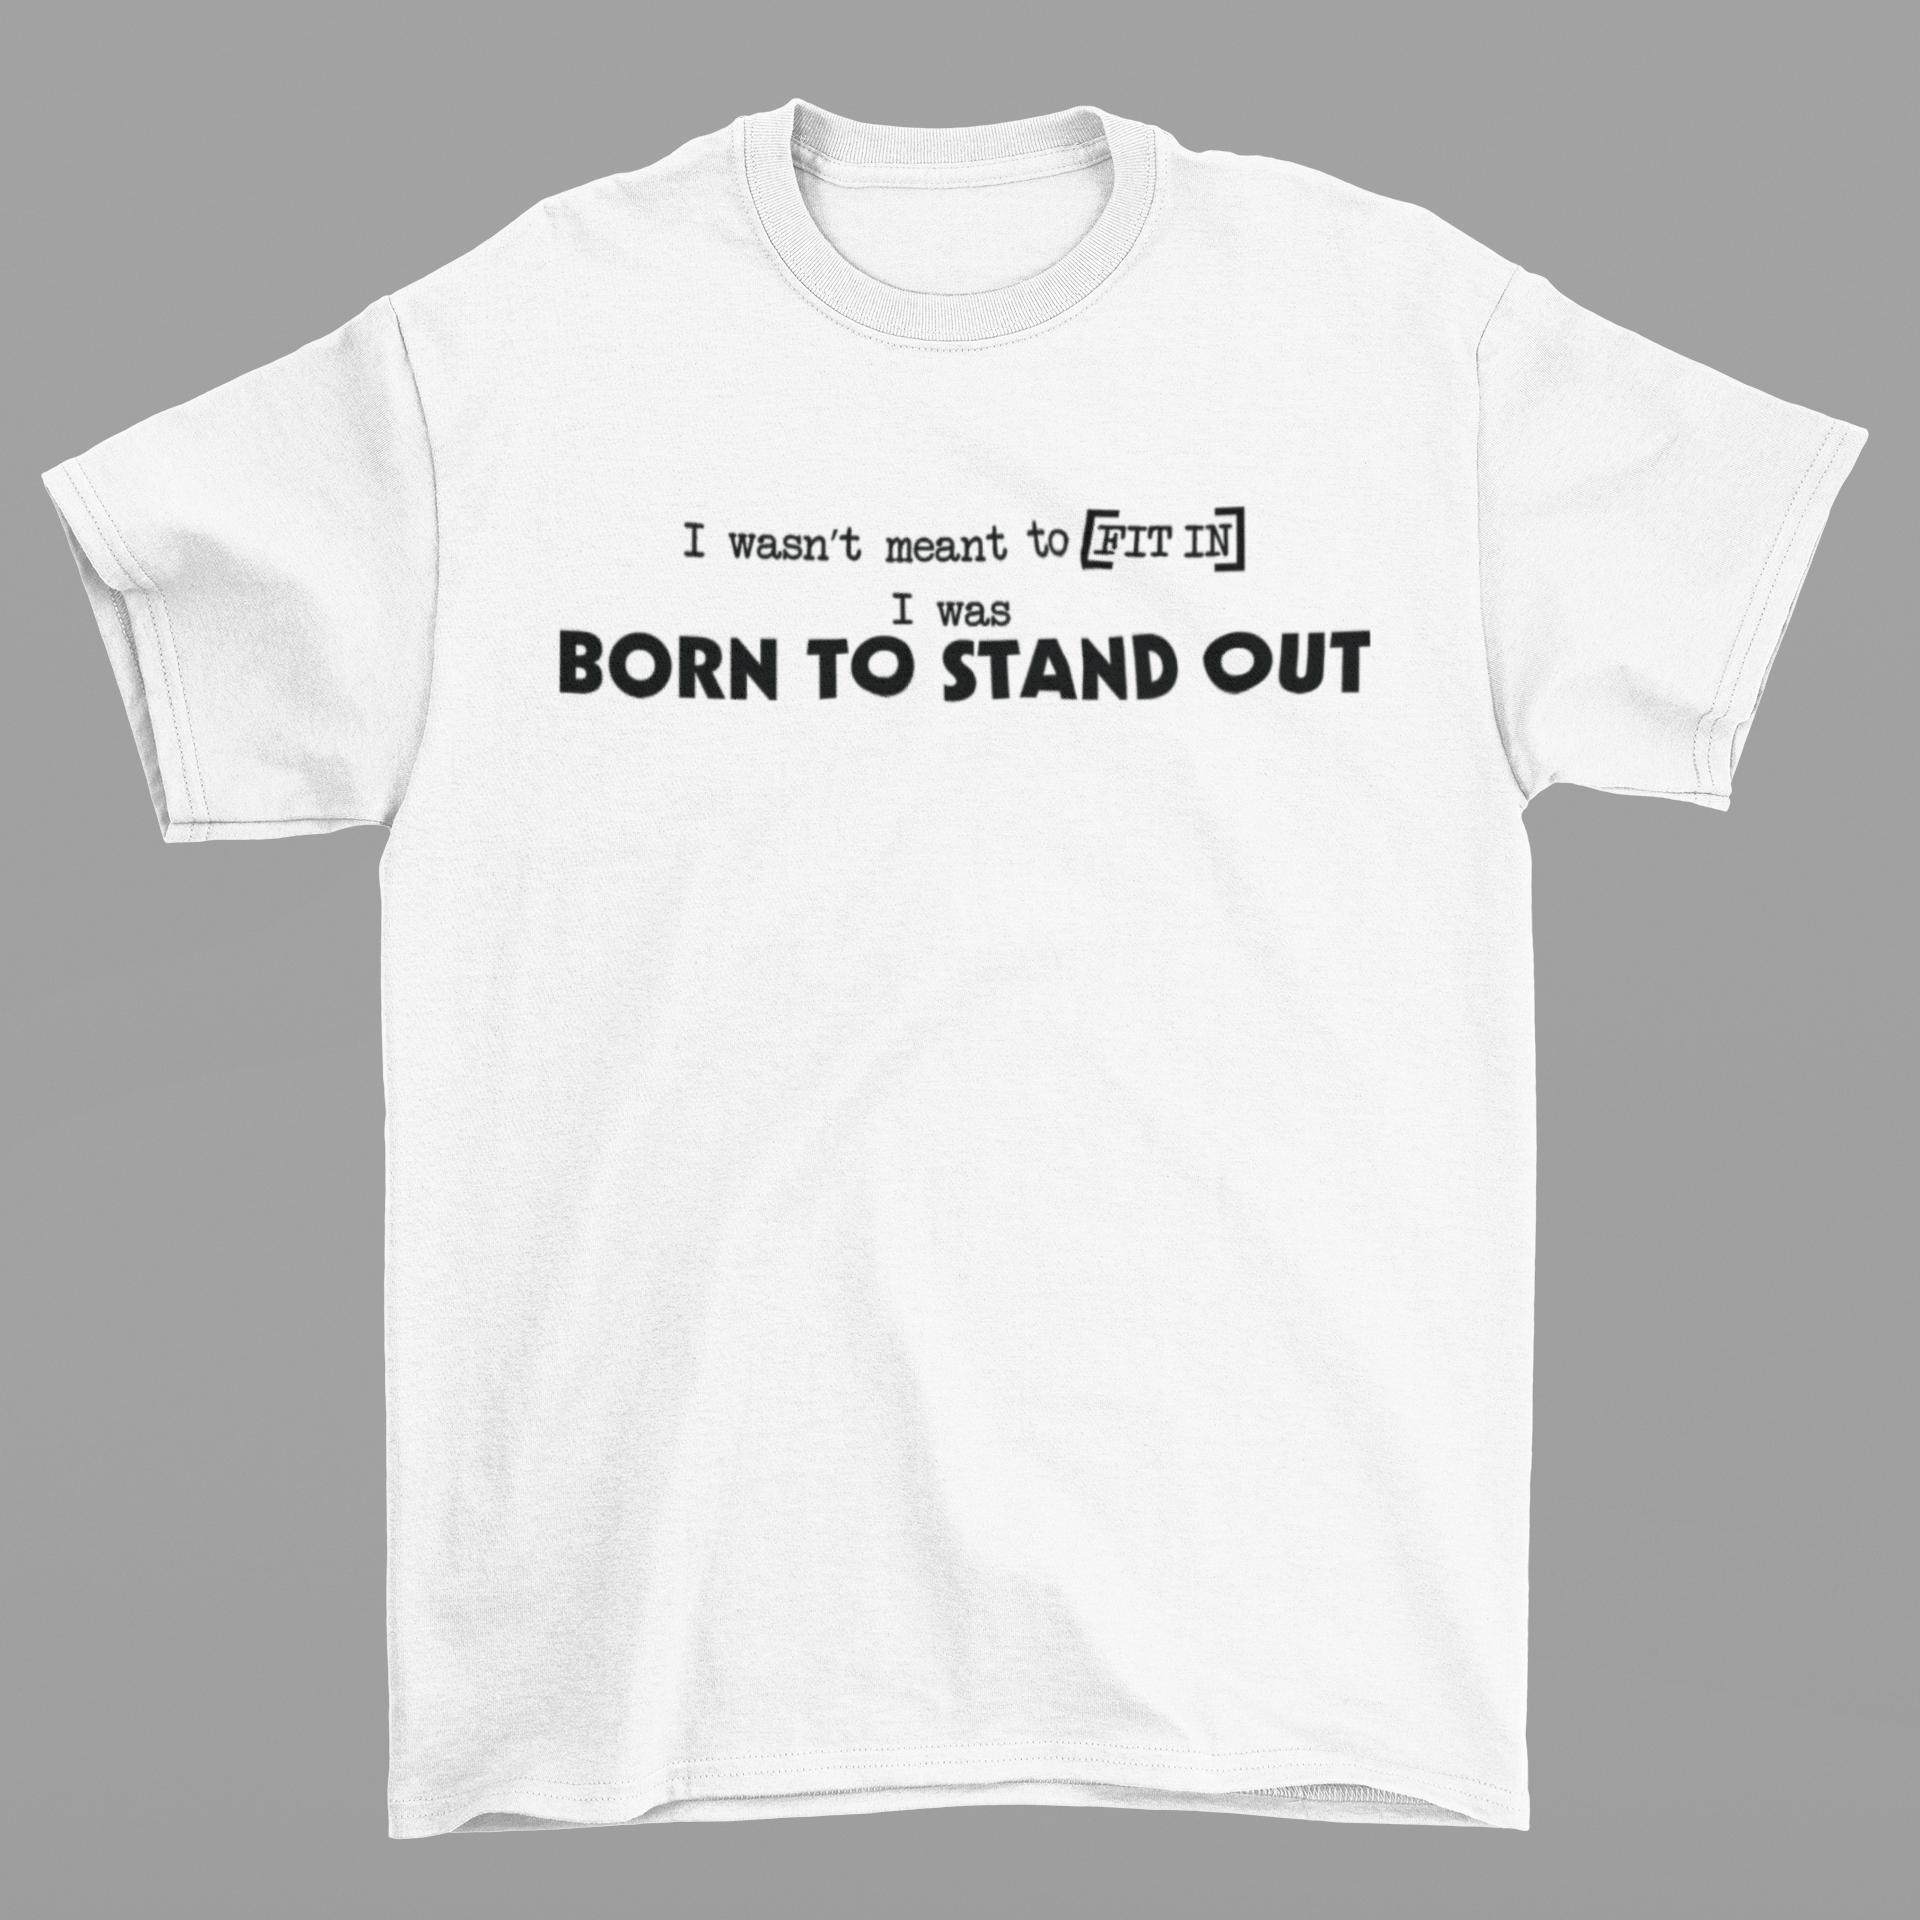 “Born to Stand Out” Designer Heavy Tee